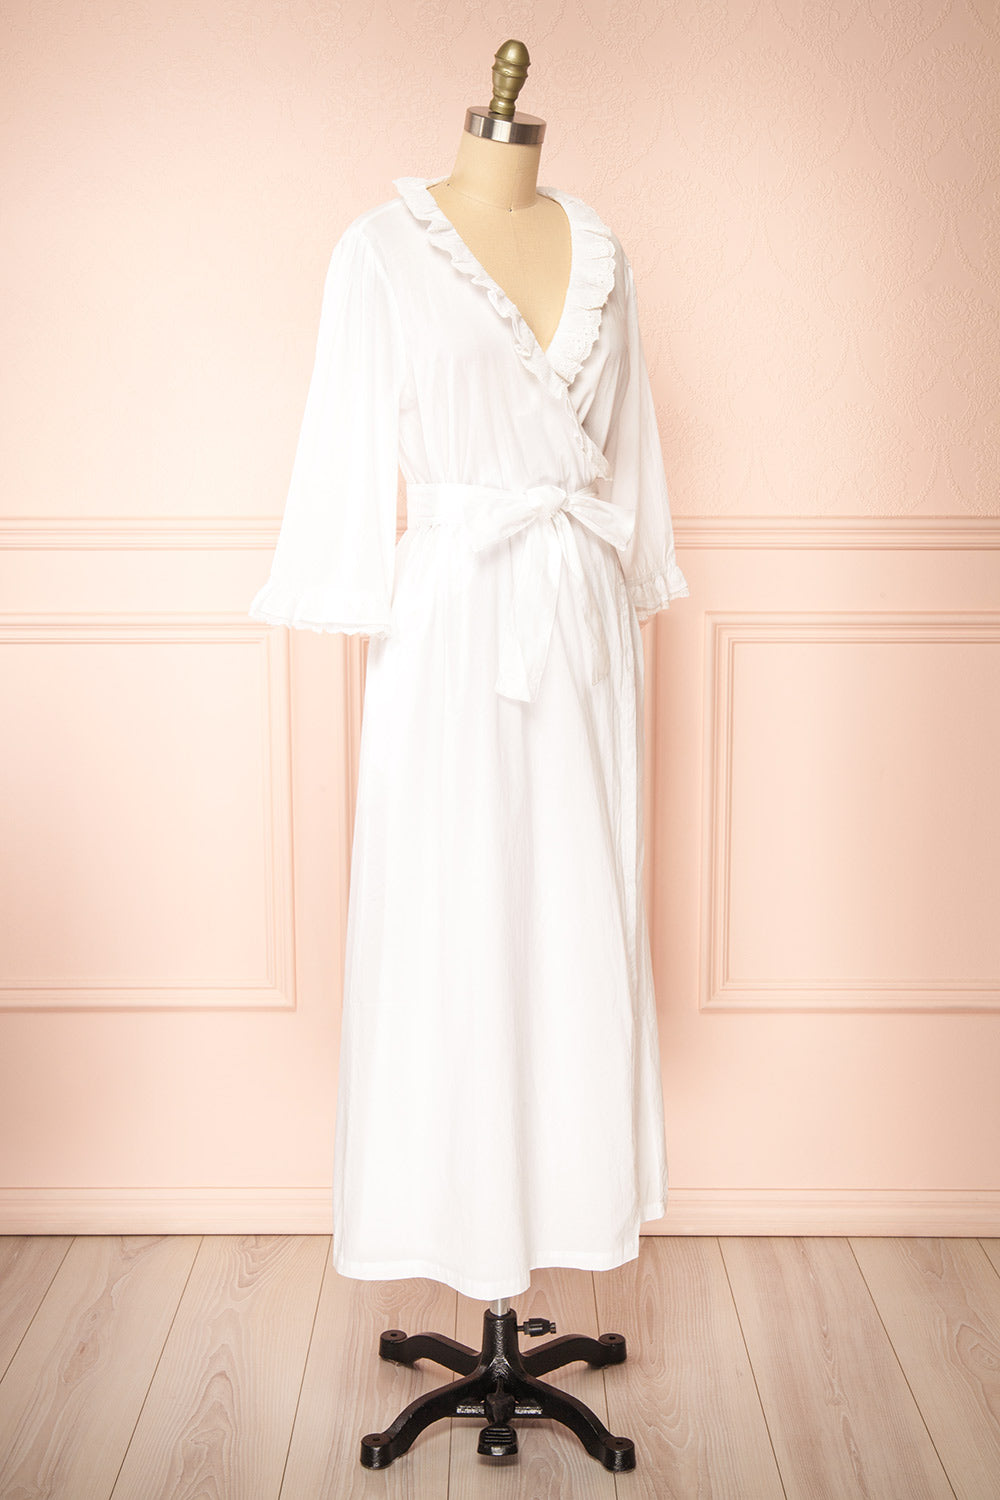 Matilda White Dressing Gown w/ Pockets | Boutique 1861 side view